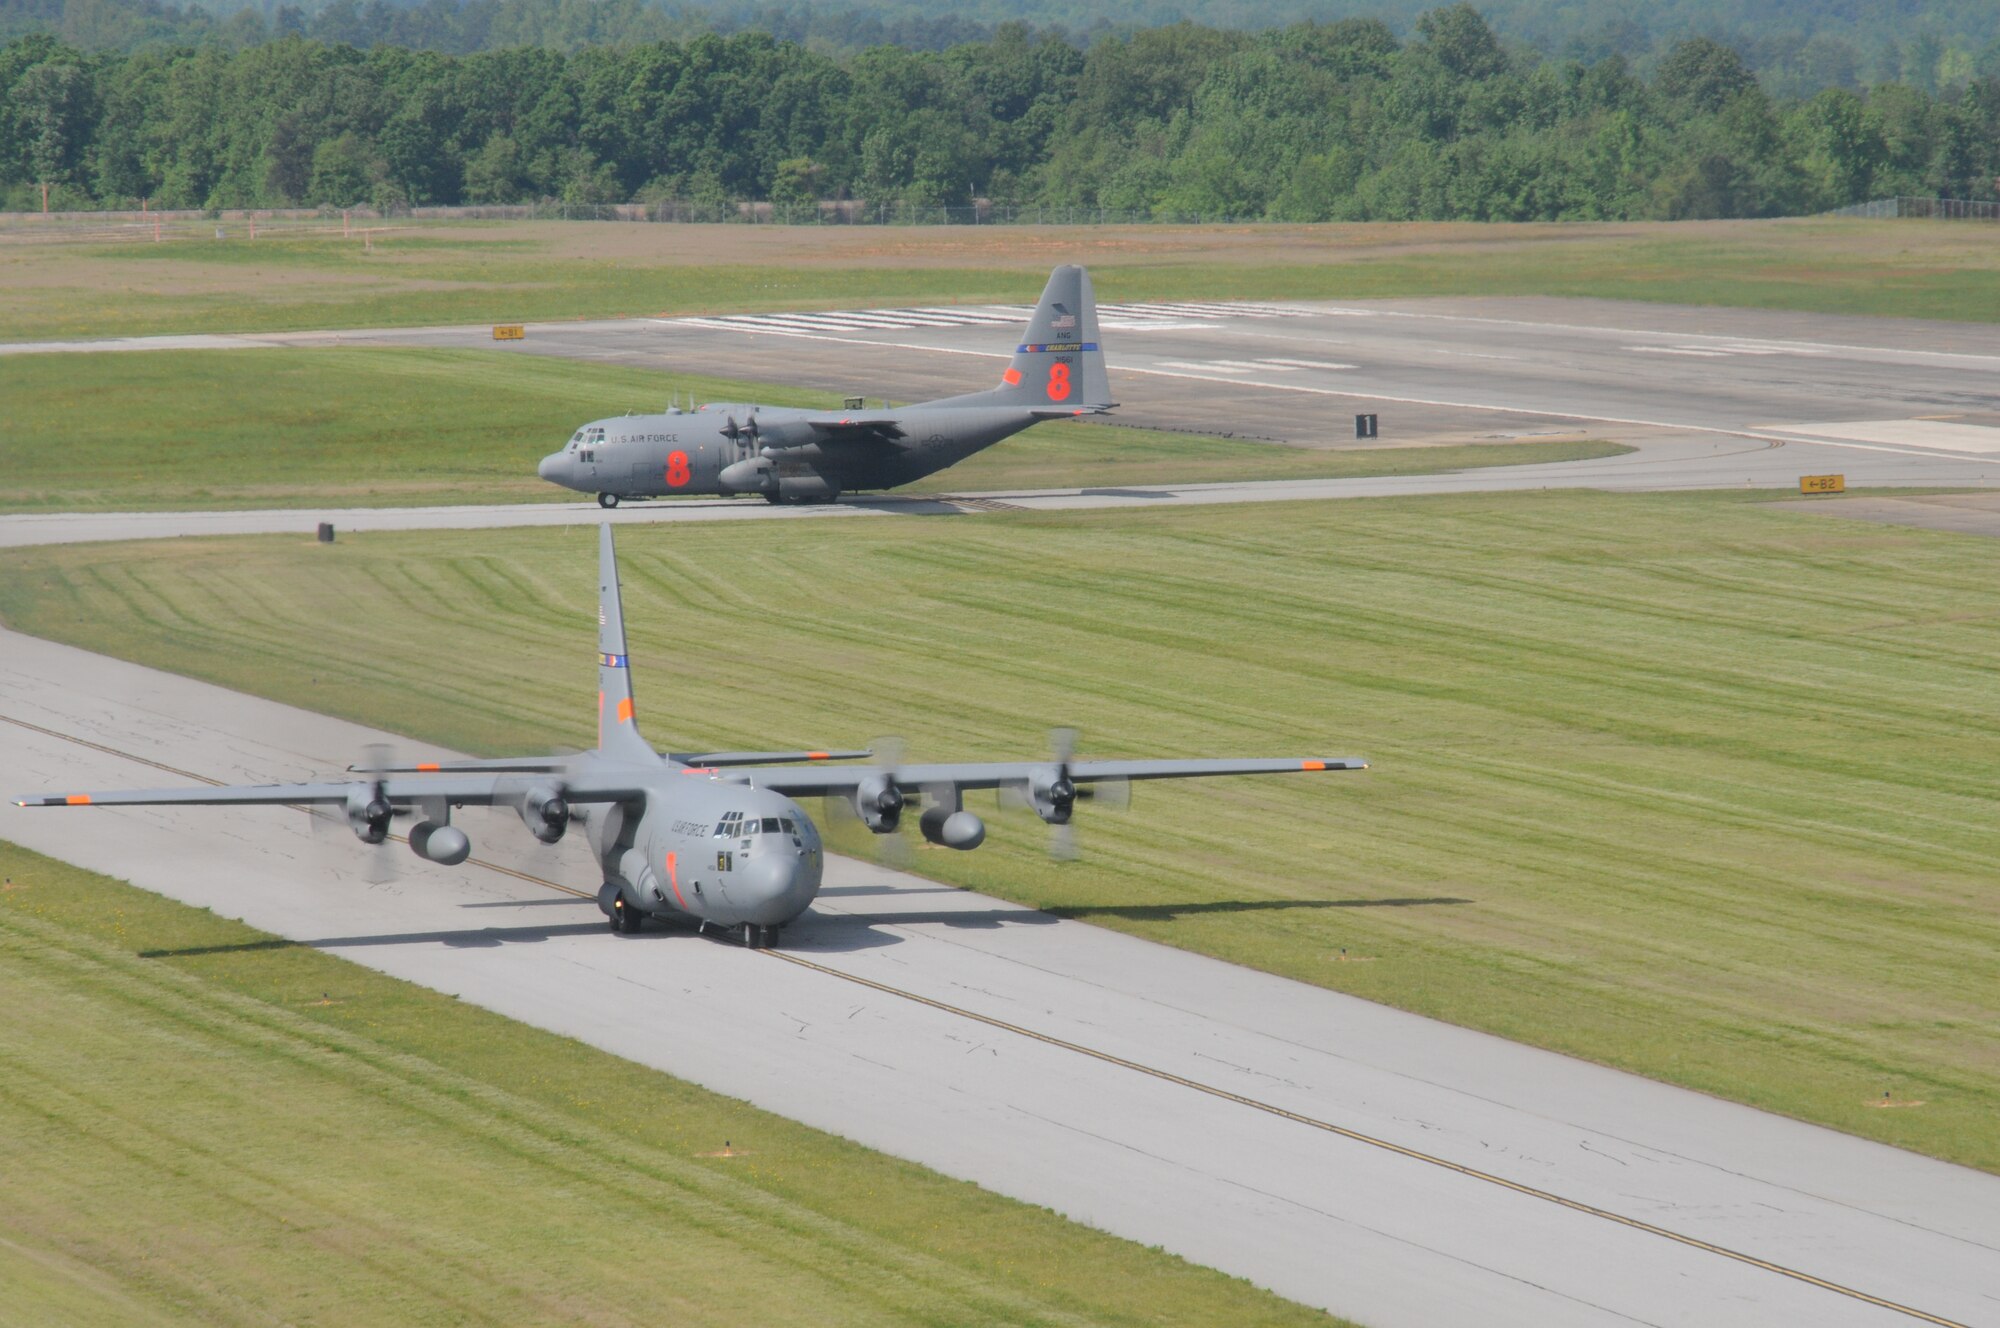 Aircraft from the North Carolina Air National Guard MAFFS seven taxies onto the runway to take-off to perform another MAFFS training mission, while MAFFS eight taxies in for another round of servicing and reloading before returning to the sky in Greenville, SC. Photo by Staff. Sgt. Richard Kerner